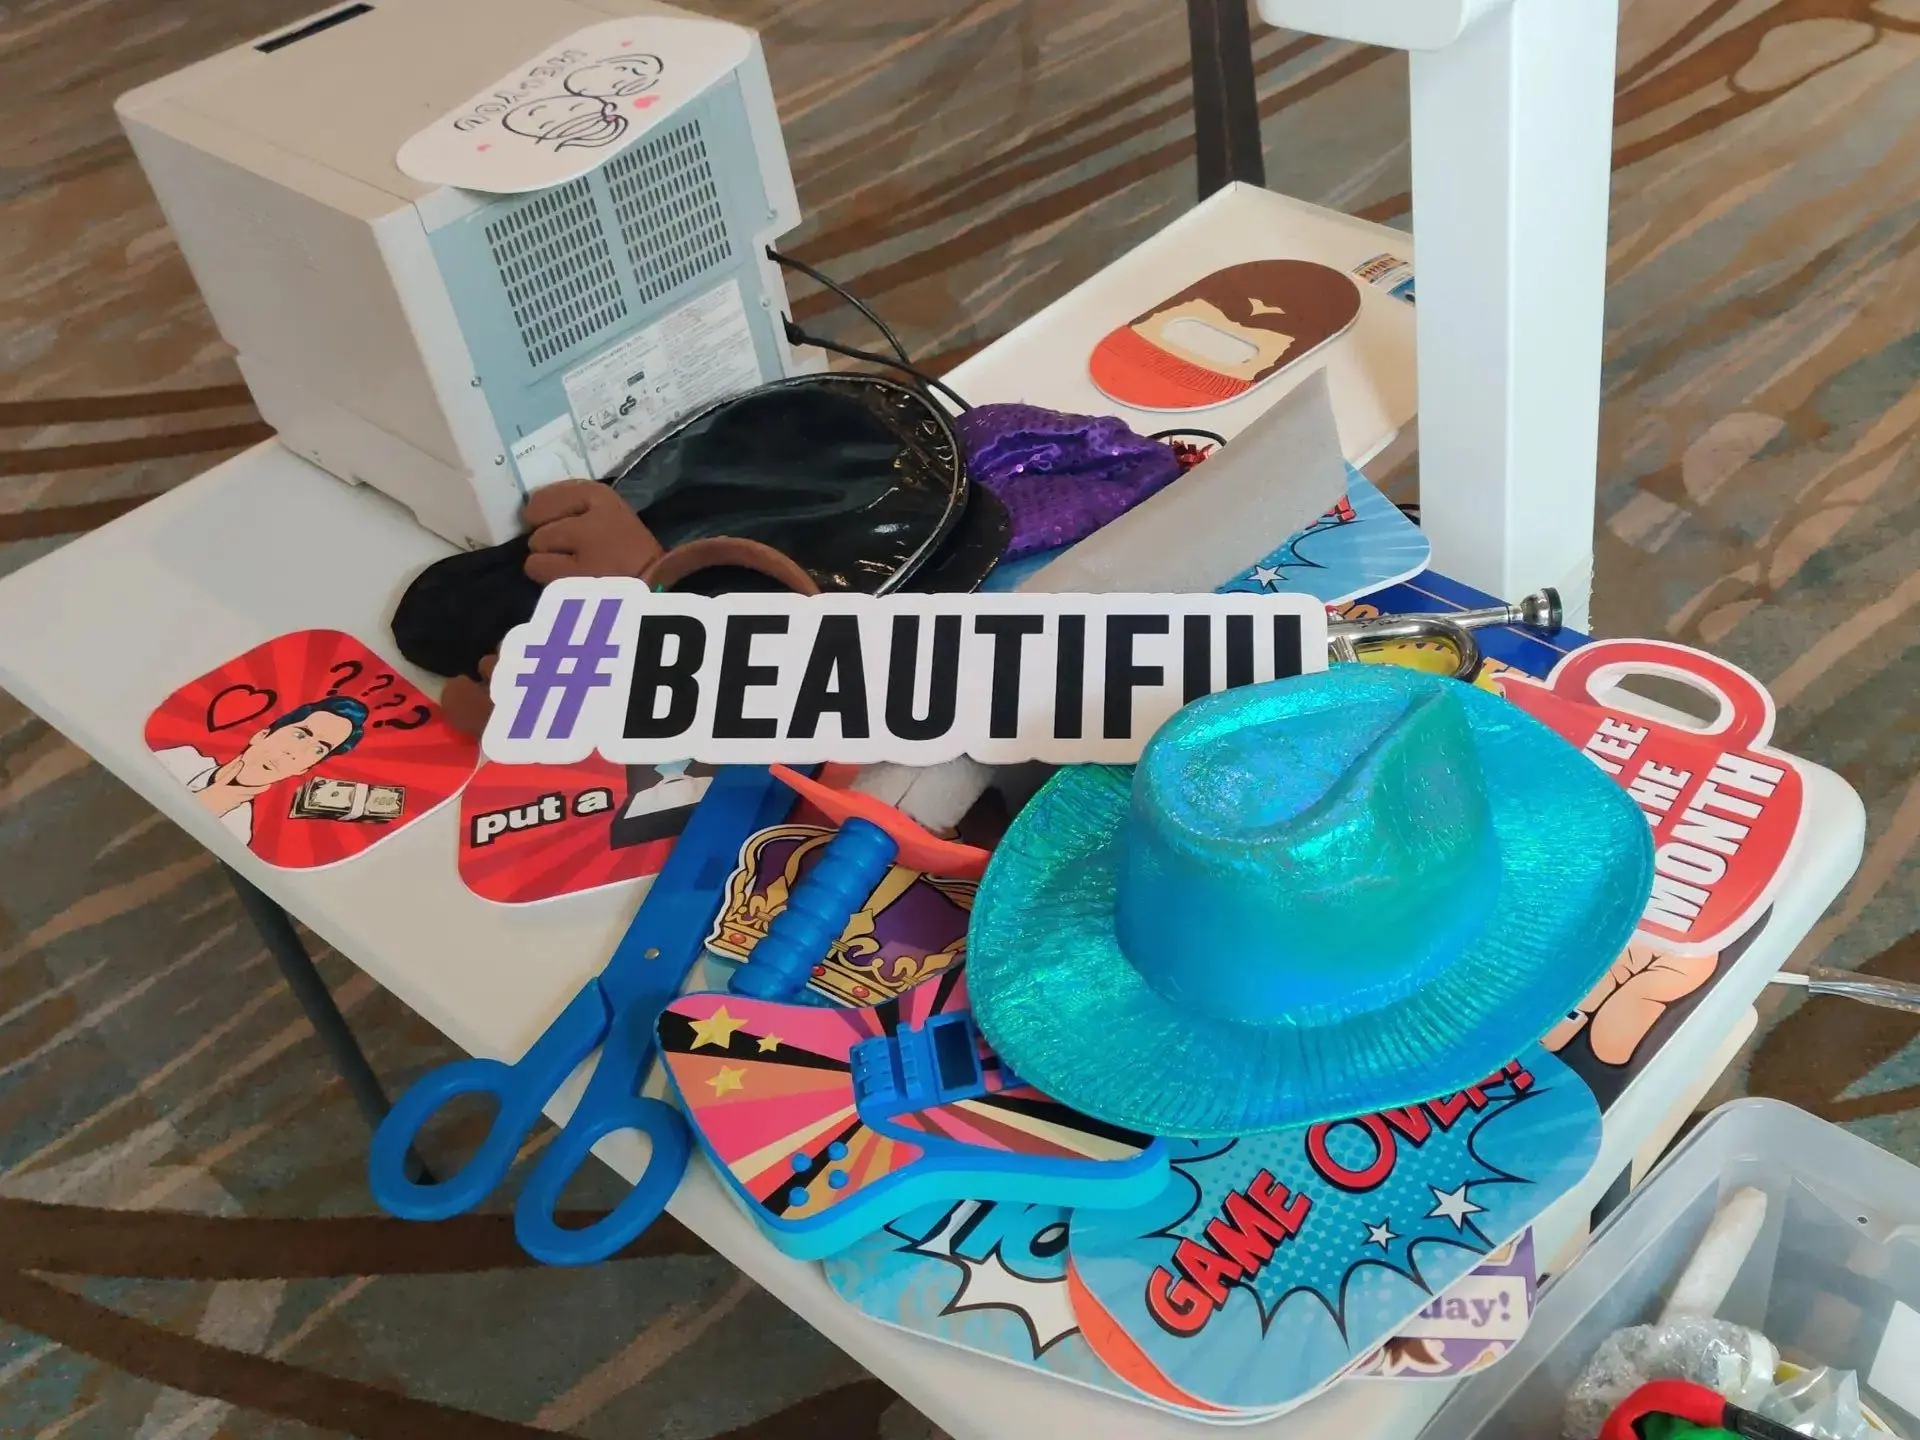 Colorful assortment of photobooth props, including a blue glitter hat, oversized sunglasses, and playful signs with hashtags and phrases, laid out on a table beside a photobooth printer, ready for guests to enjoy at Rent a PhotoBooth photobooth rental events.